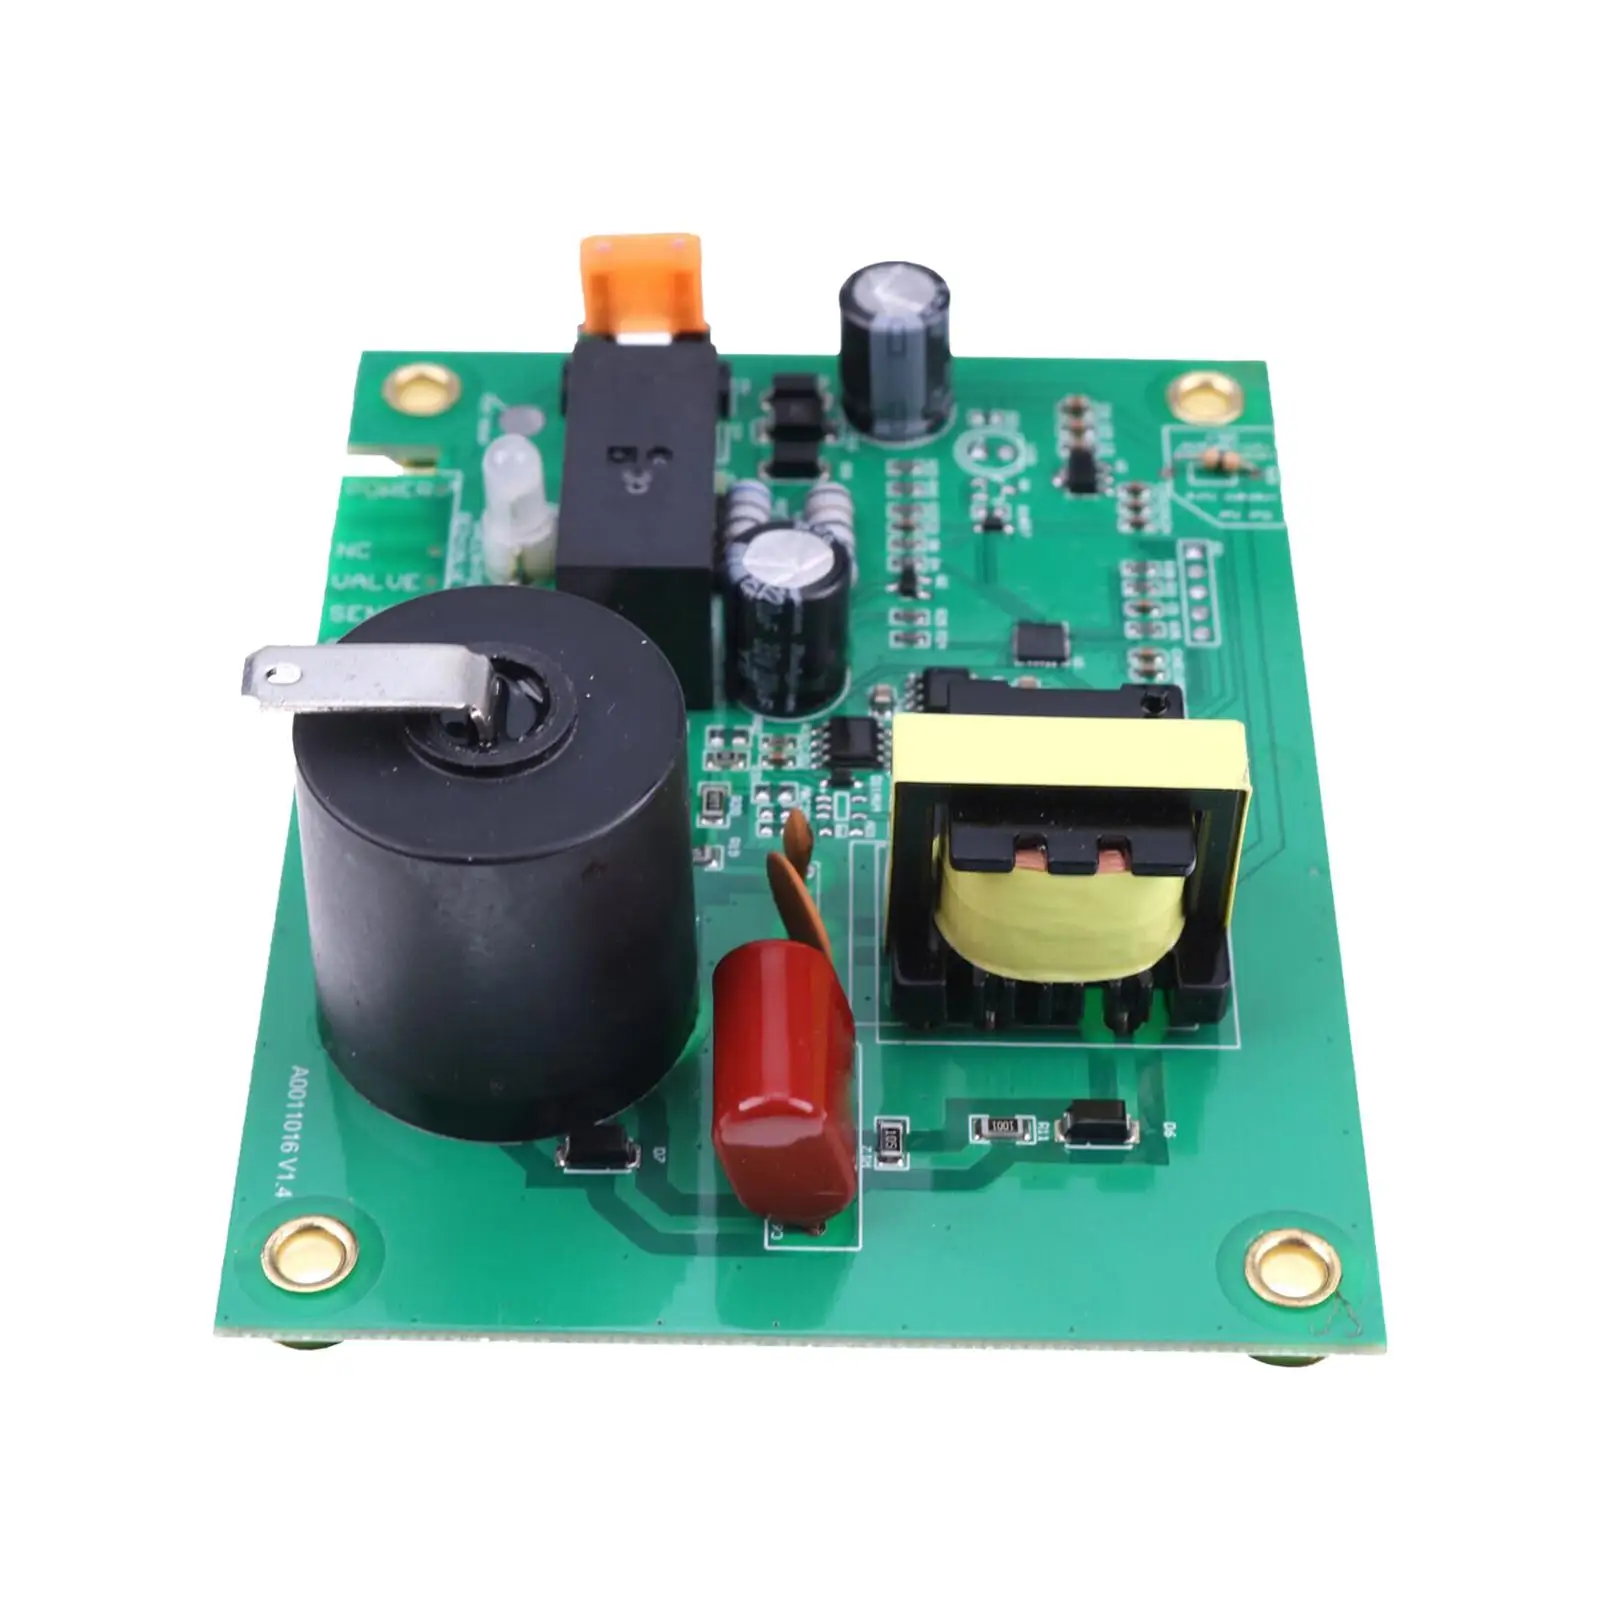 Ignitor Board Uib S Universal DC 12V External Sense Connector Water Heater Control Circuit Board Professional Easily to Install